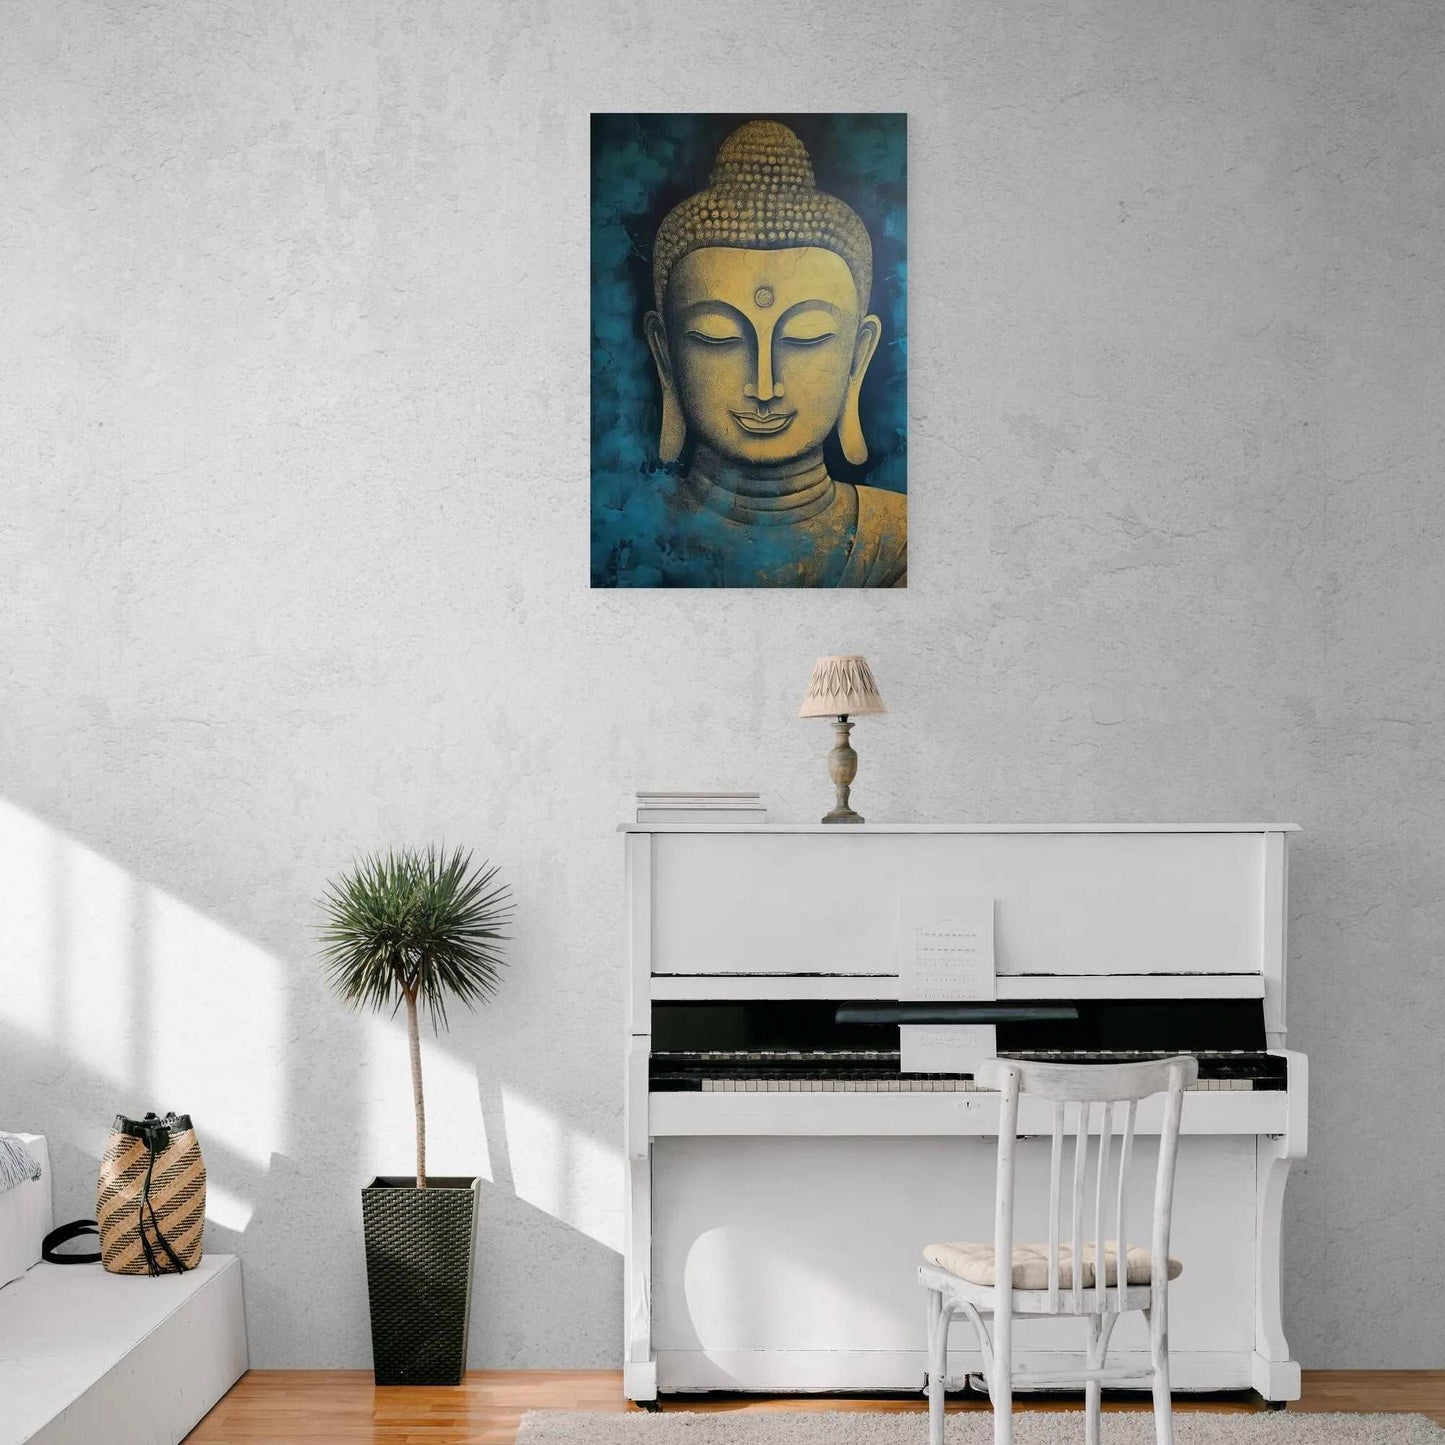 Golden Buddha head canvas displayed above a white piano against a textured wall, with a potted plant and chair beside.